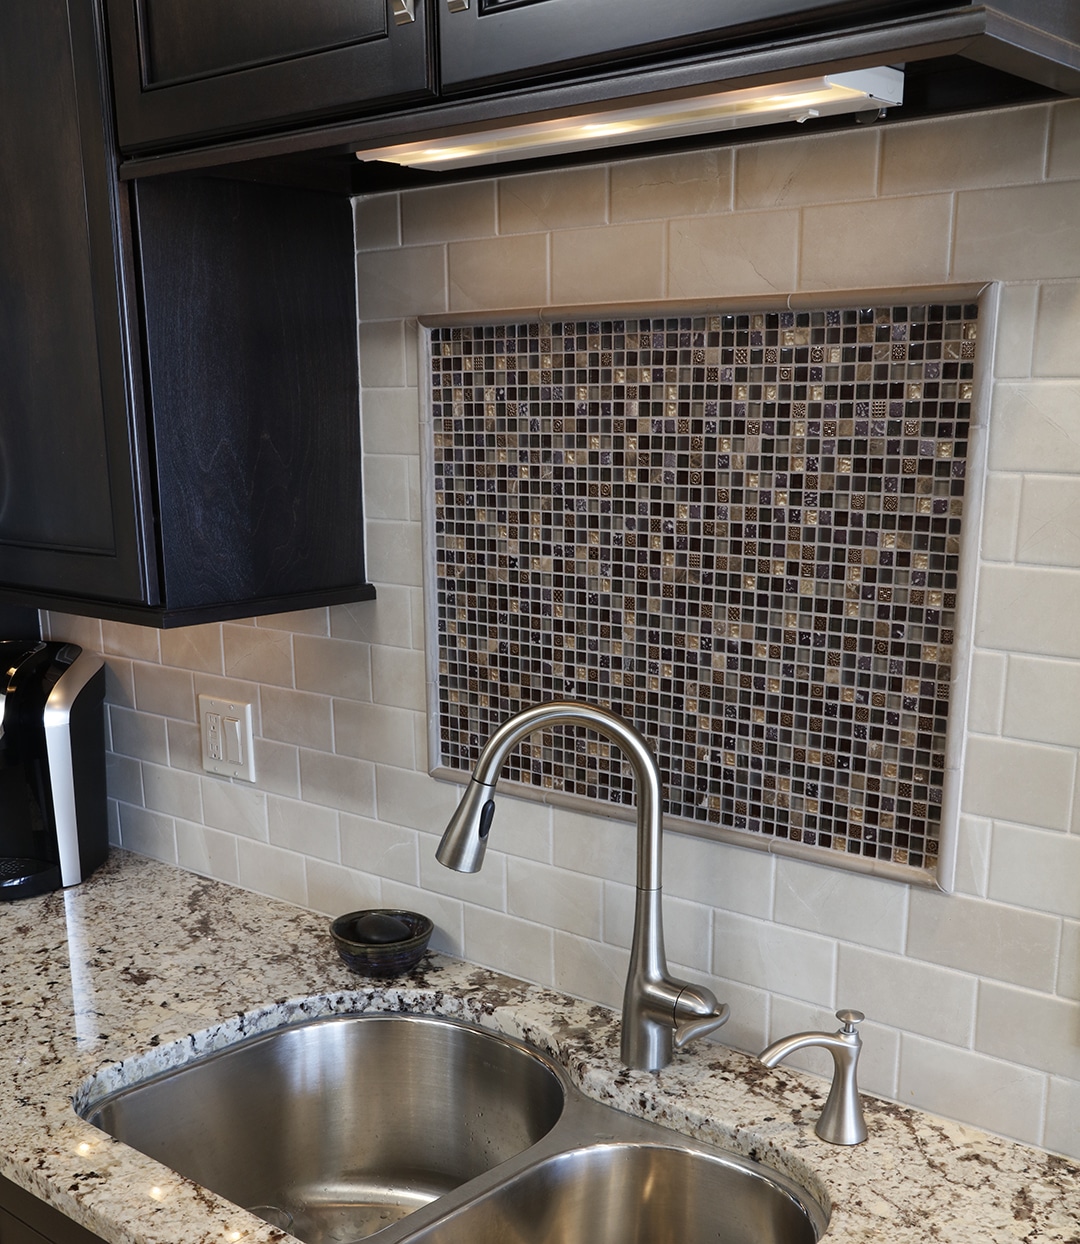 Kitchen backsplash with subway tile and decorative mosaic inlay focal point